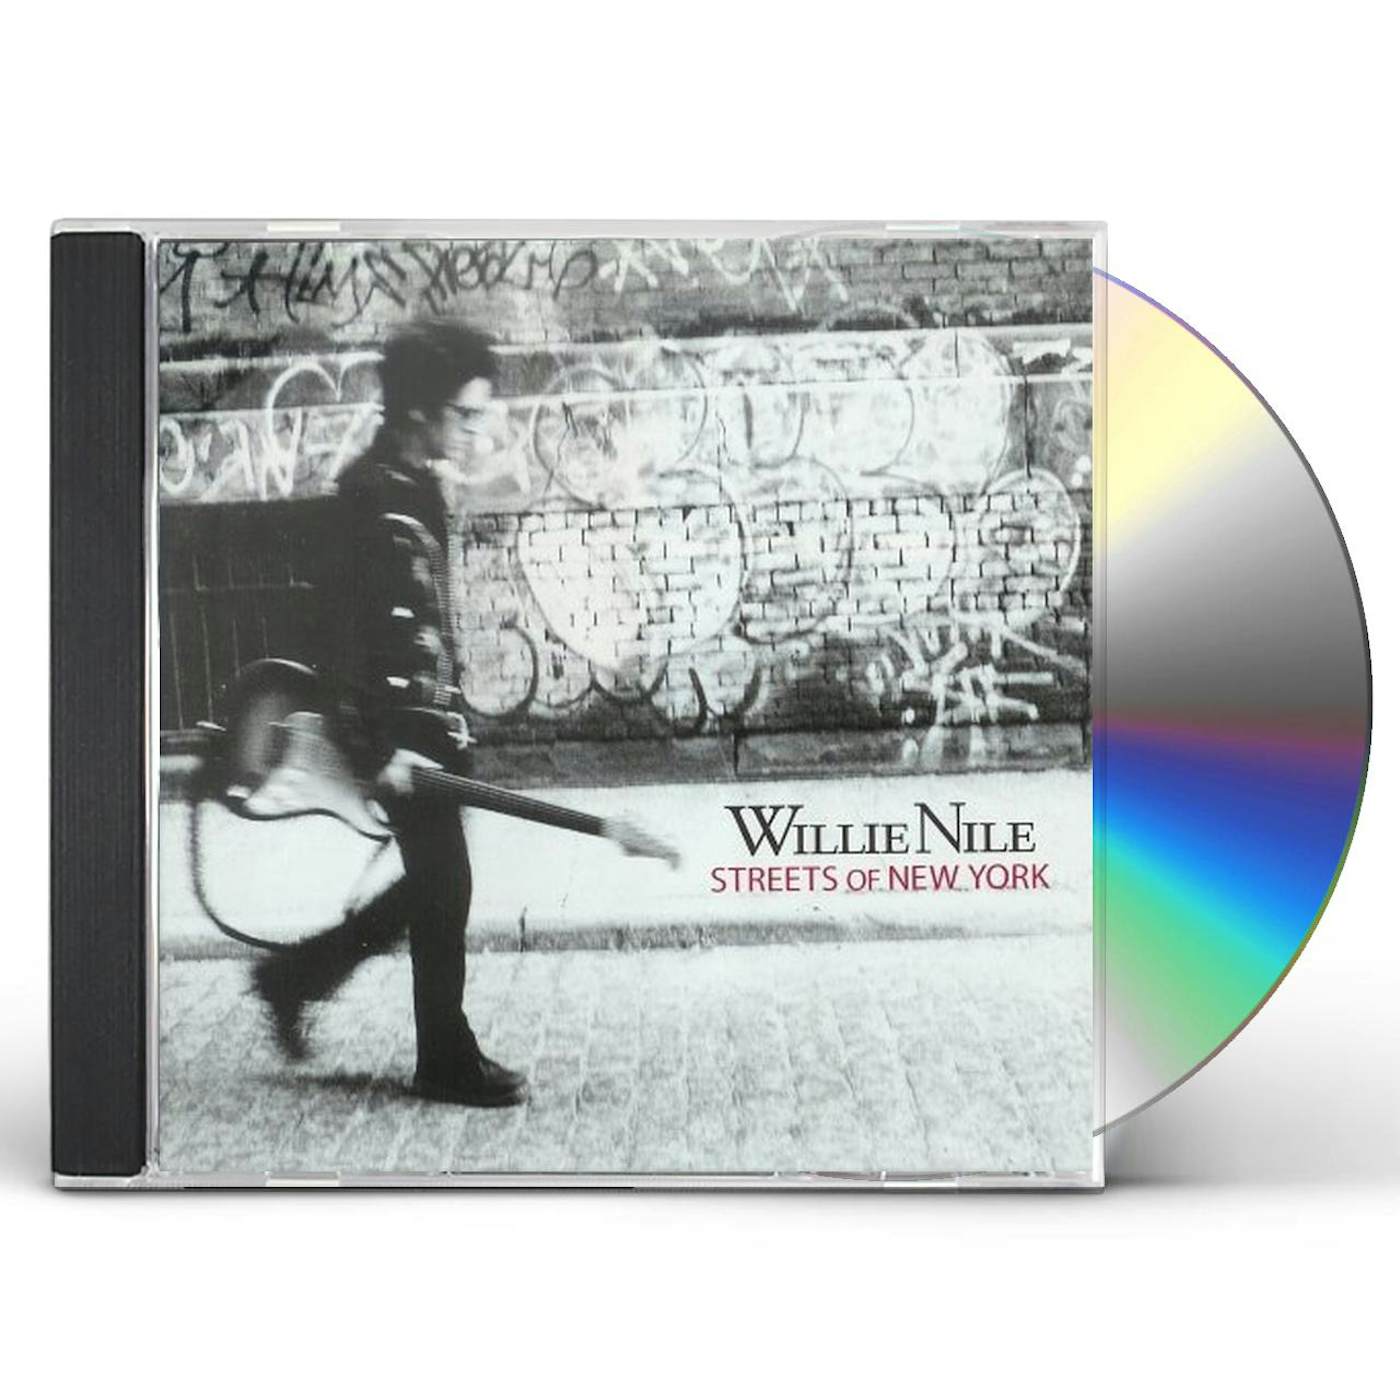 Willie Nile STREETS OF NEW YORK CD